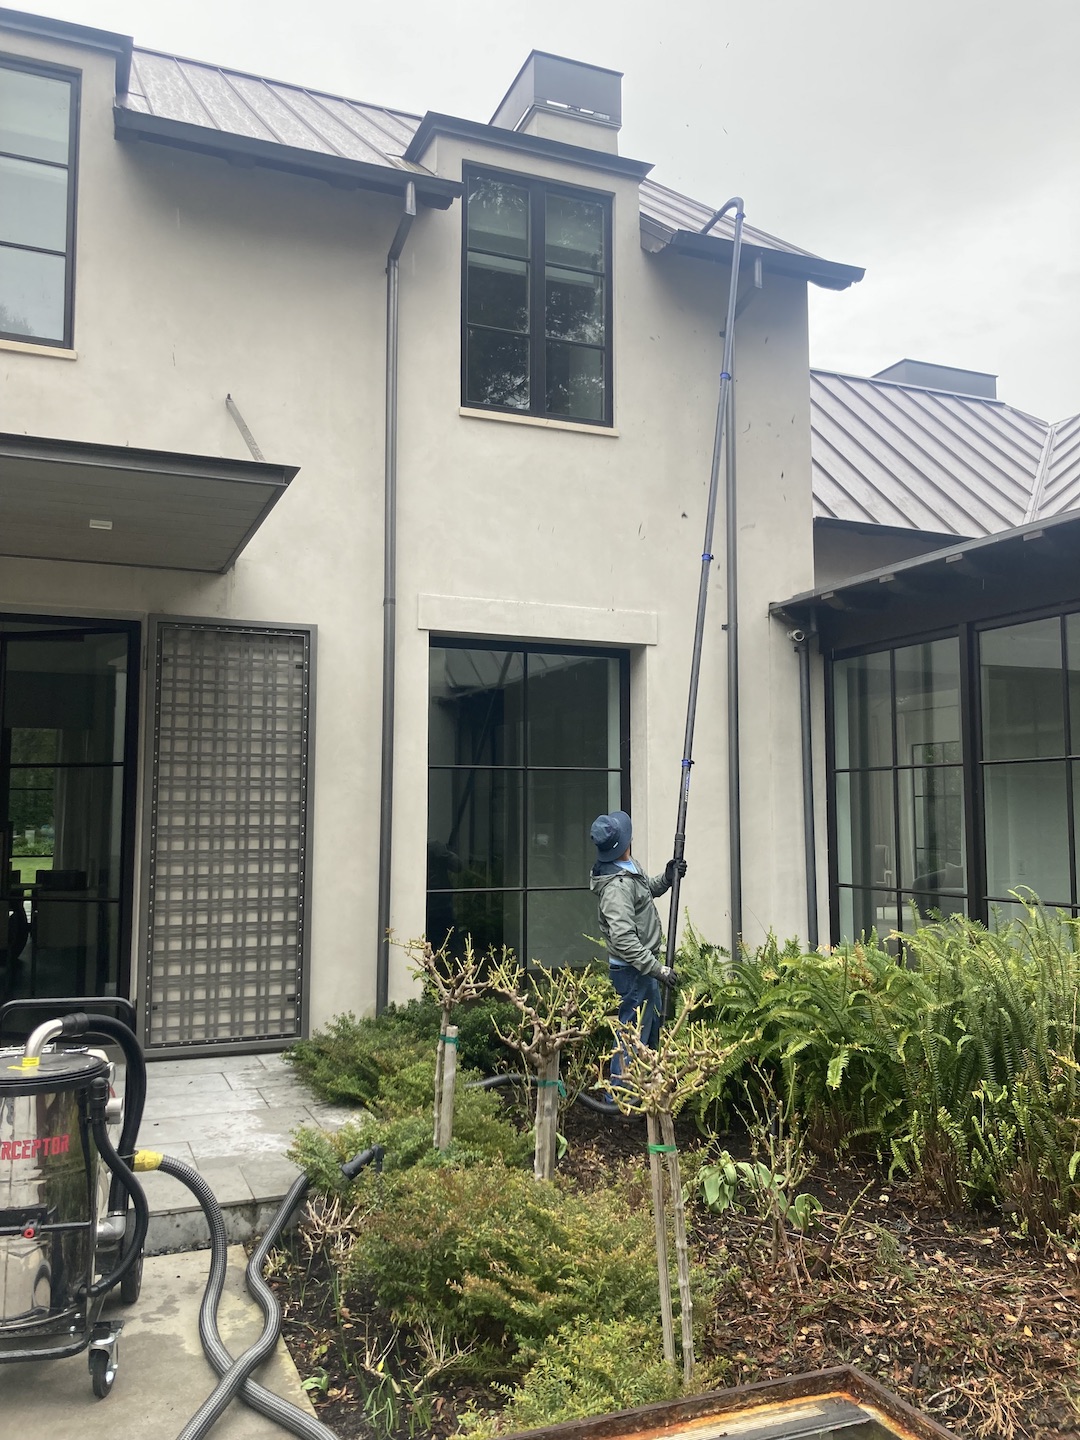 Gutter Cleaning Service in Atherton, CA